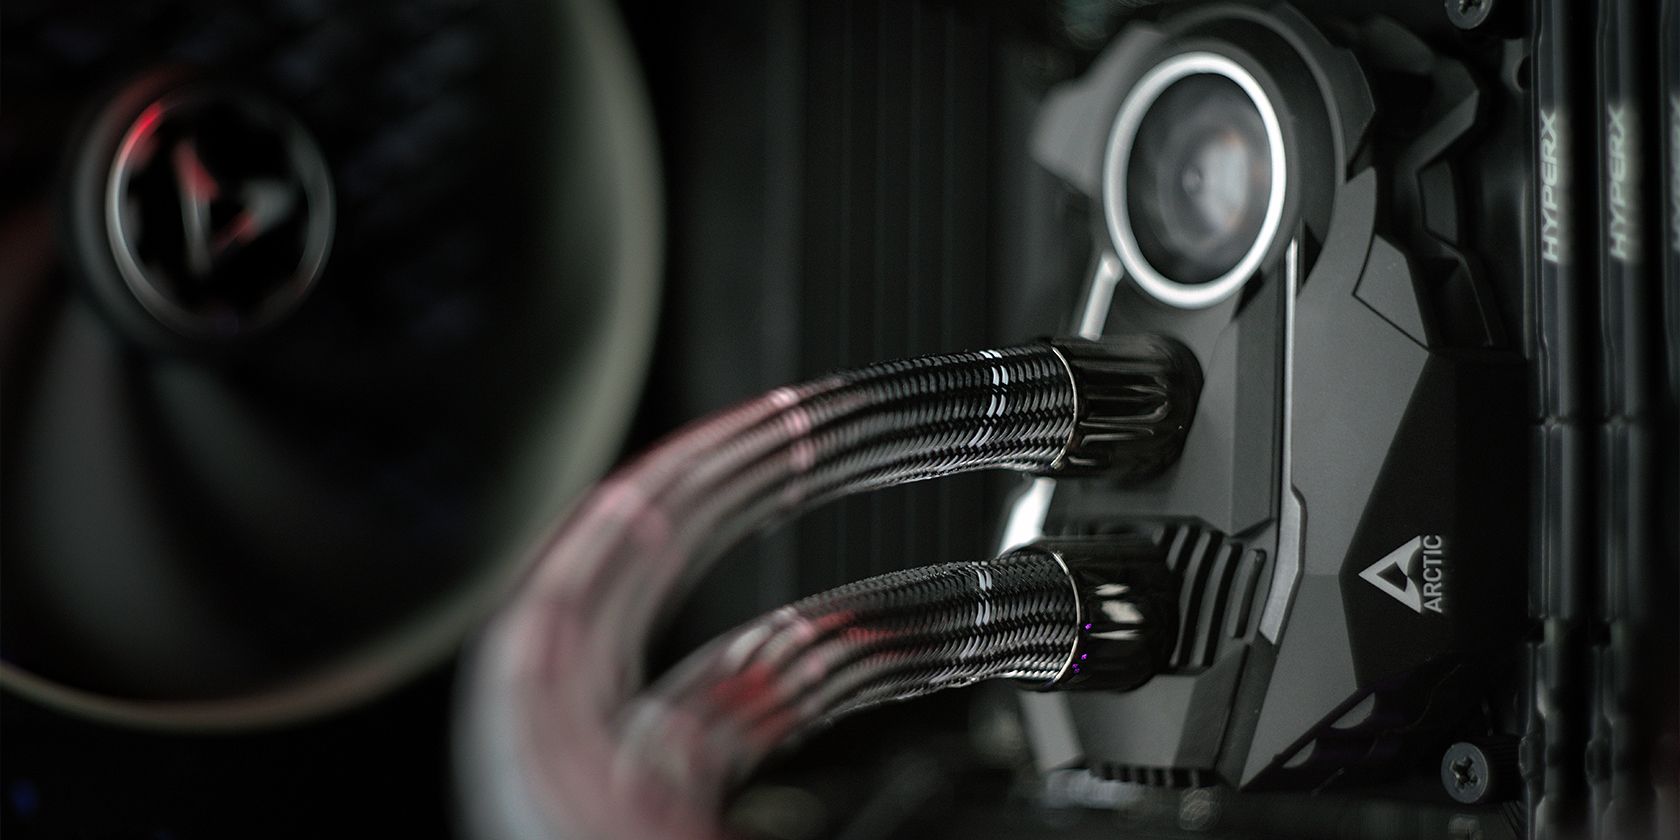 The Water Block of an Arctic AIO Cooler